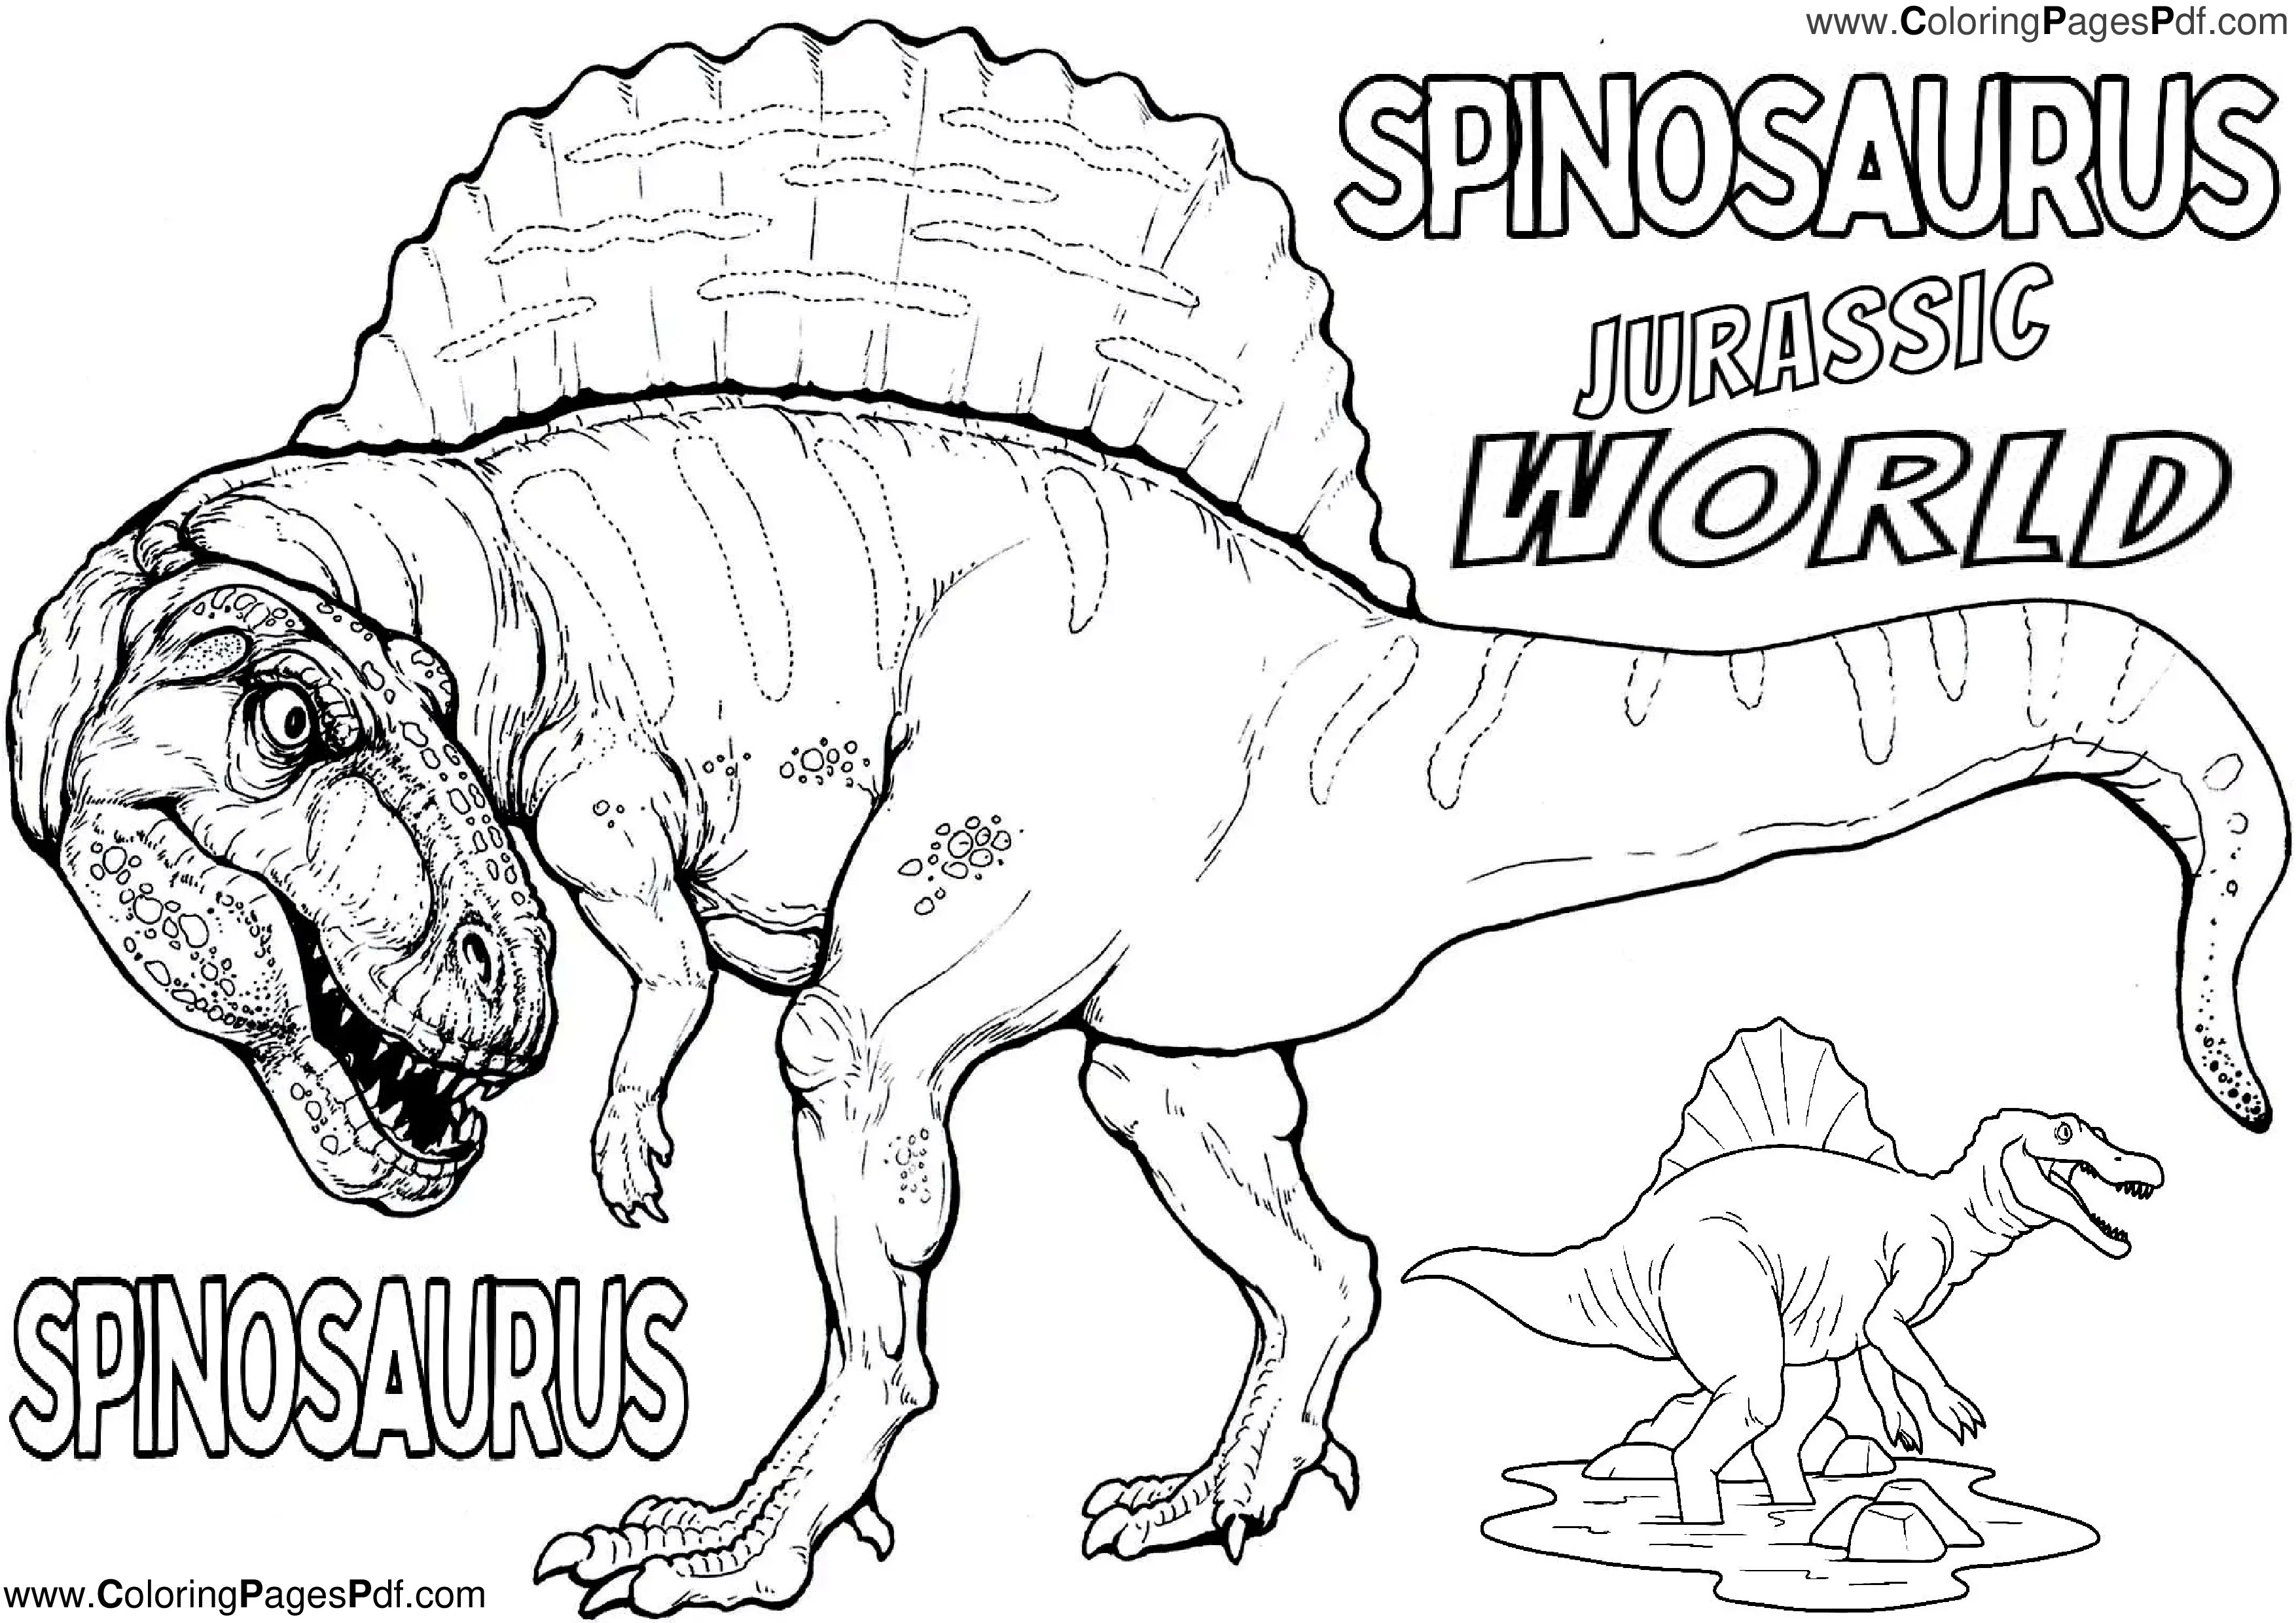 Jurassic world coloring pages spinosaurus